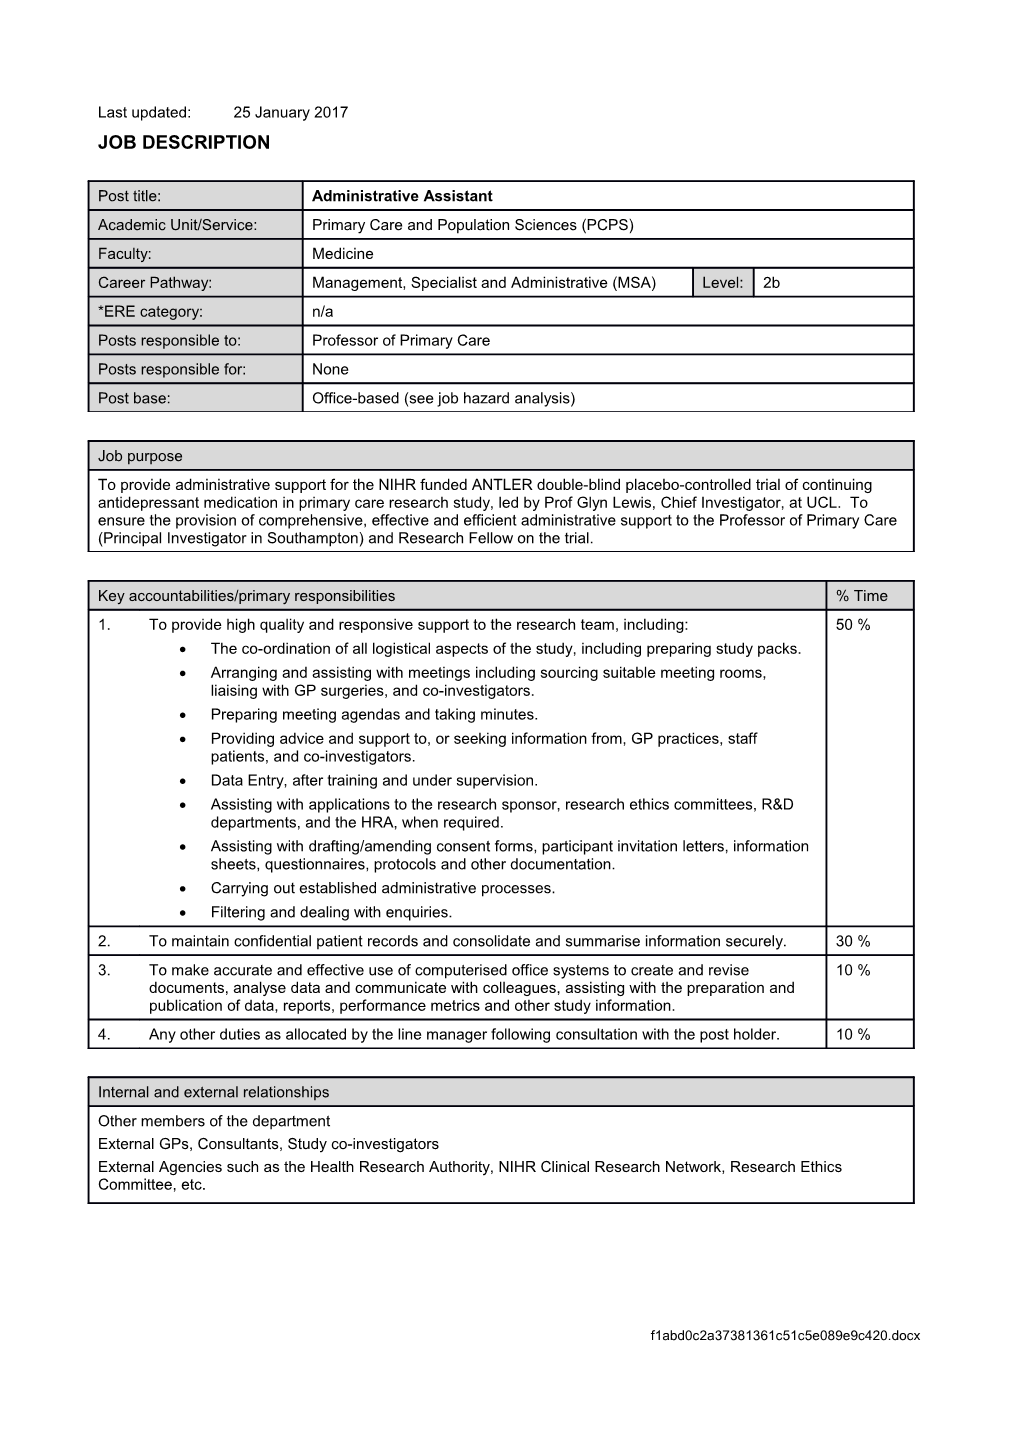 Person Specification s12